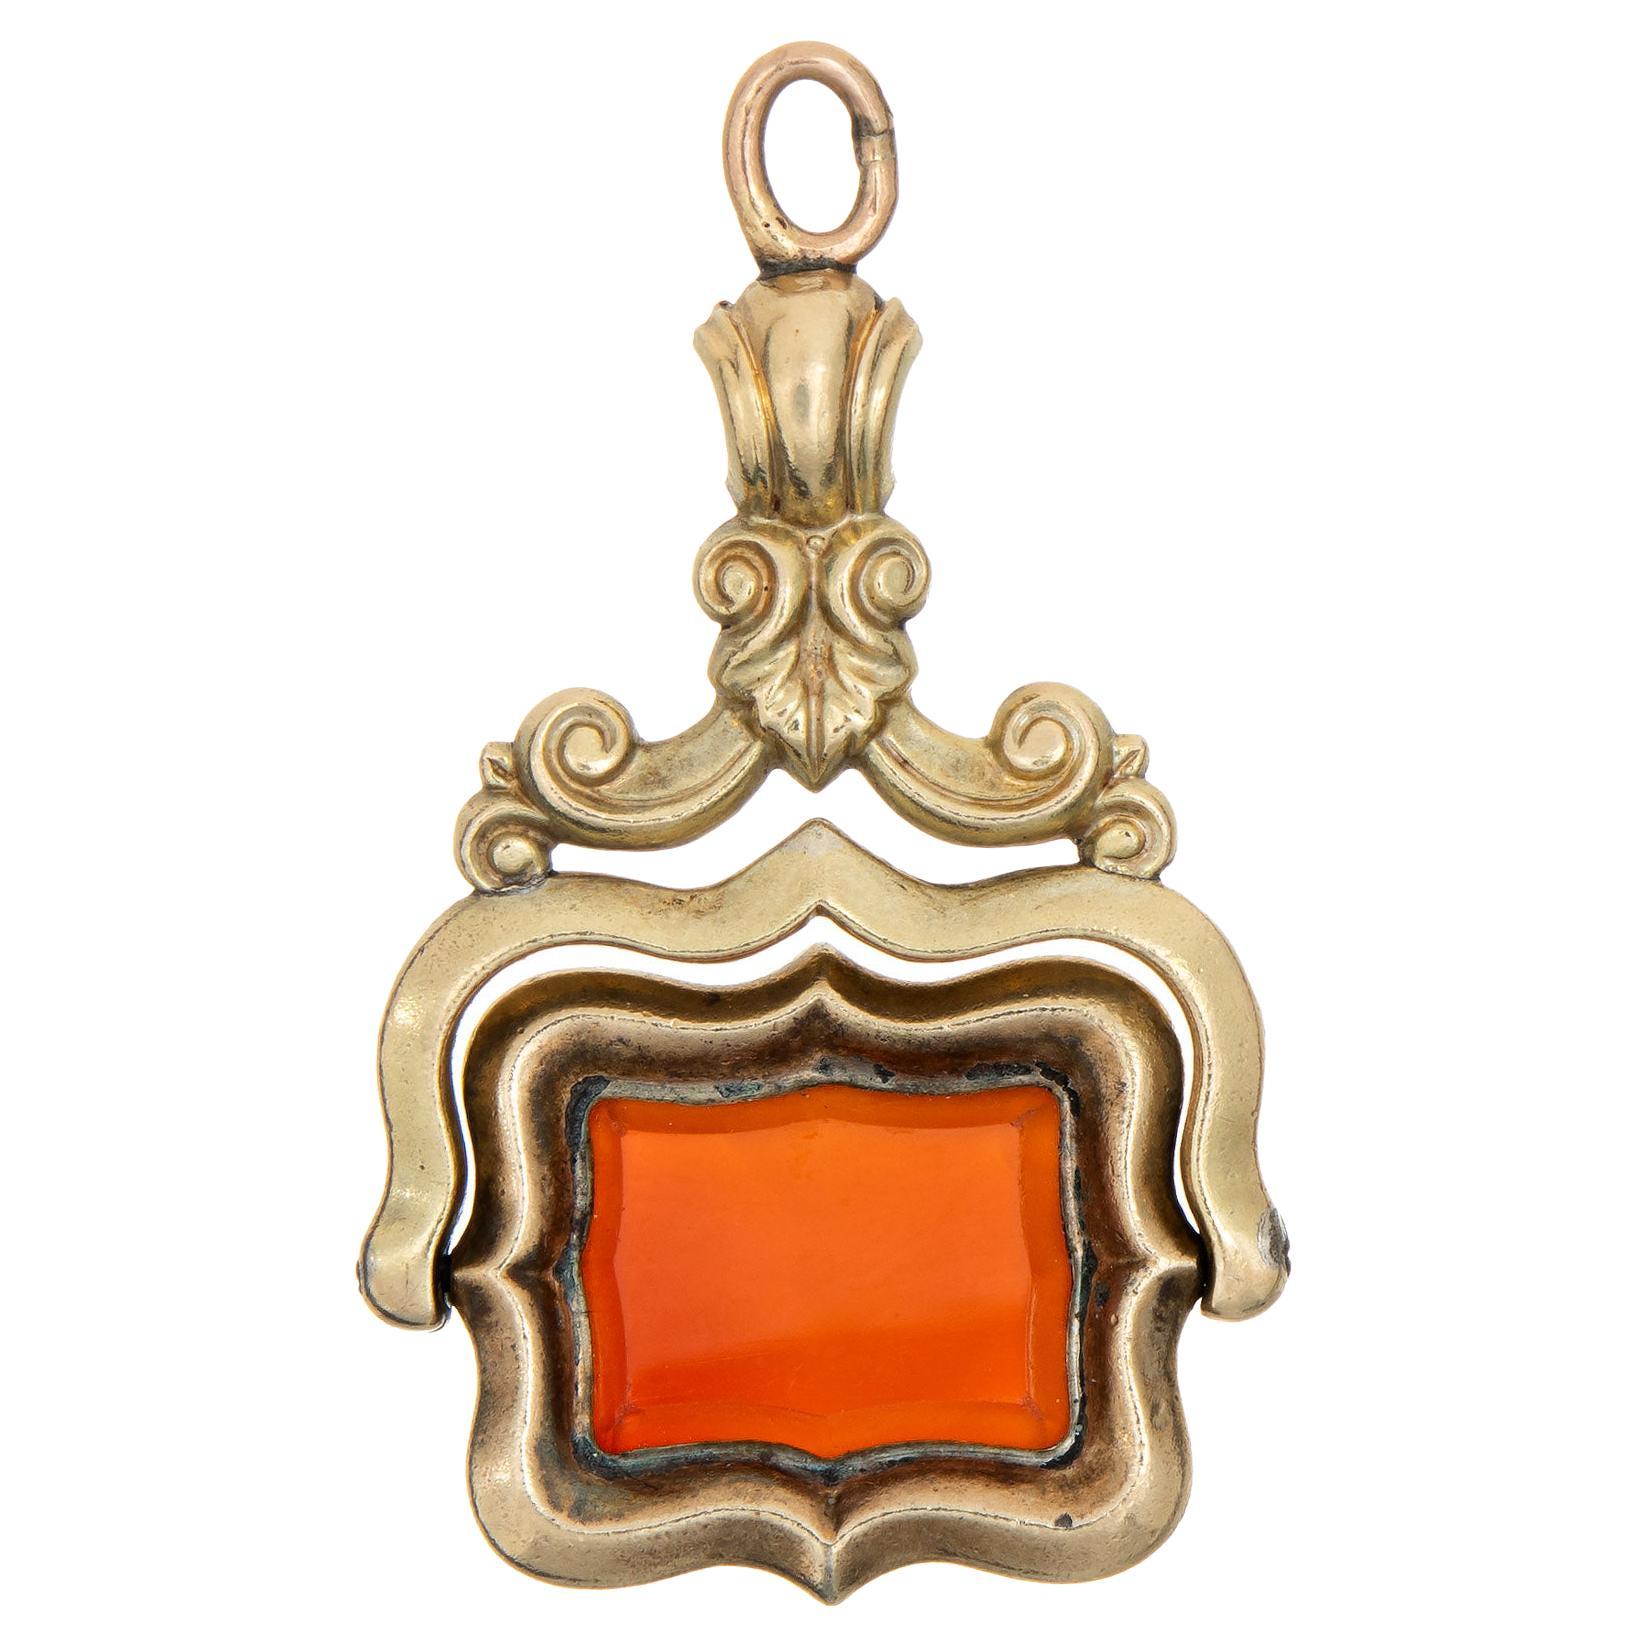 Antique Victorian Spinning Fob 14k Yellow Gold Carnelian Charm Pendant Jewelry